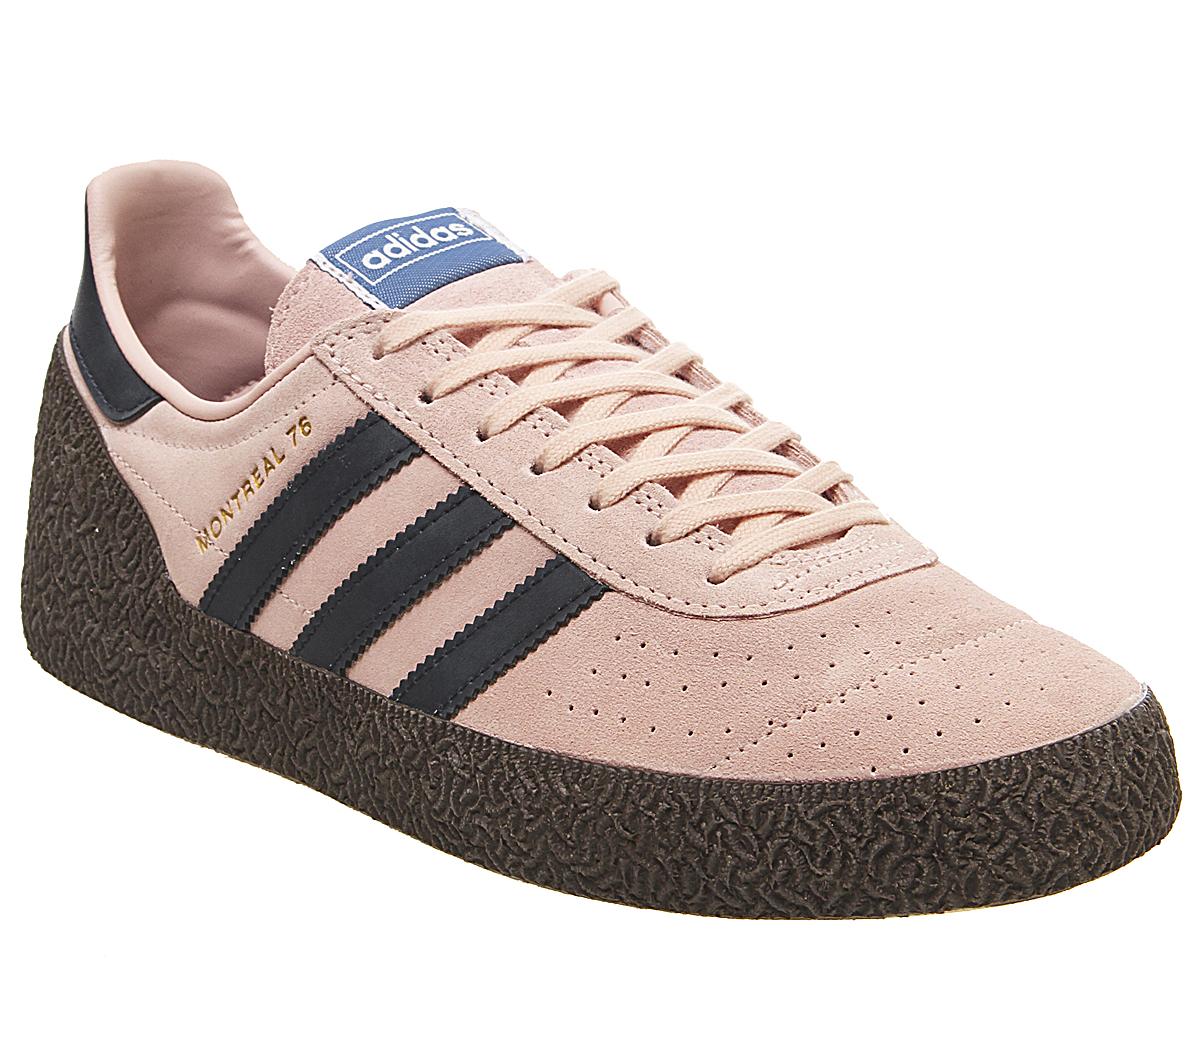 adidas Montreal 76 Trainers Vapour Pink 